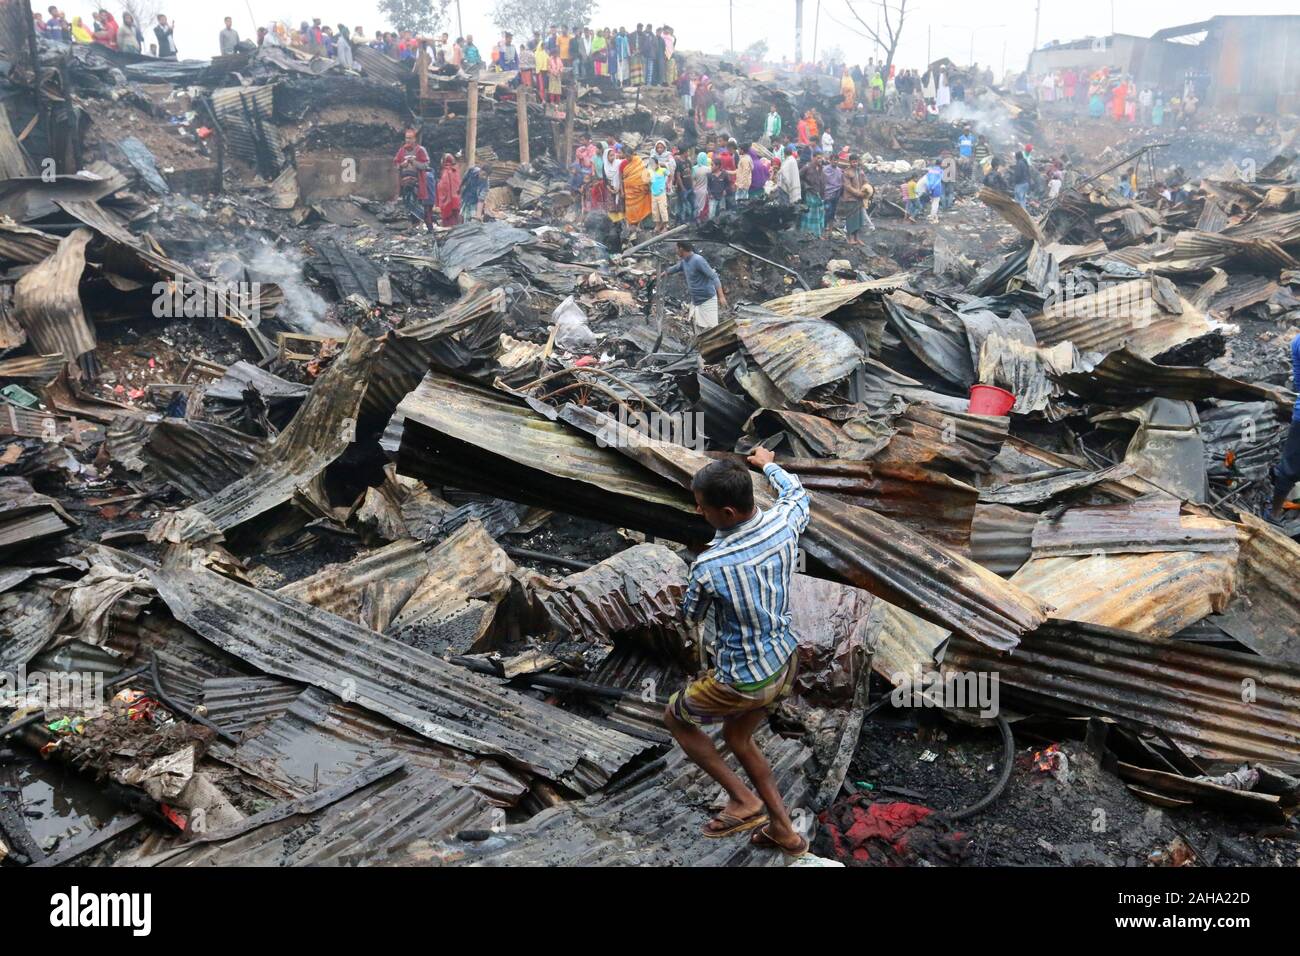 Dwellers at the fire devastated slum in Baunia badh area of Kalshi at Dhaka’s Mirpur.A fire gutted over 100 shanties at a slum in Baunia badh area of Kalshi at Dhaka’s Mirpur. Stock Photo